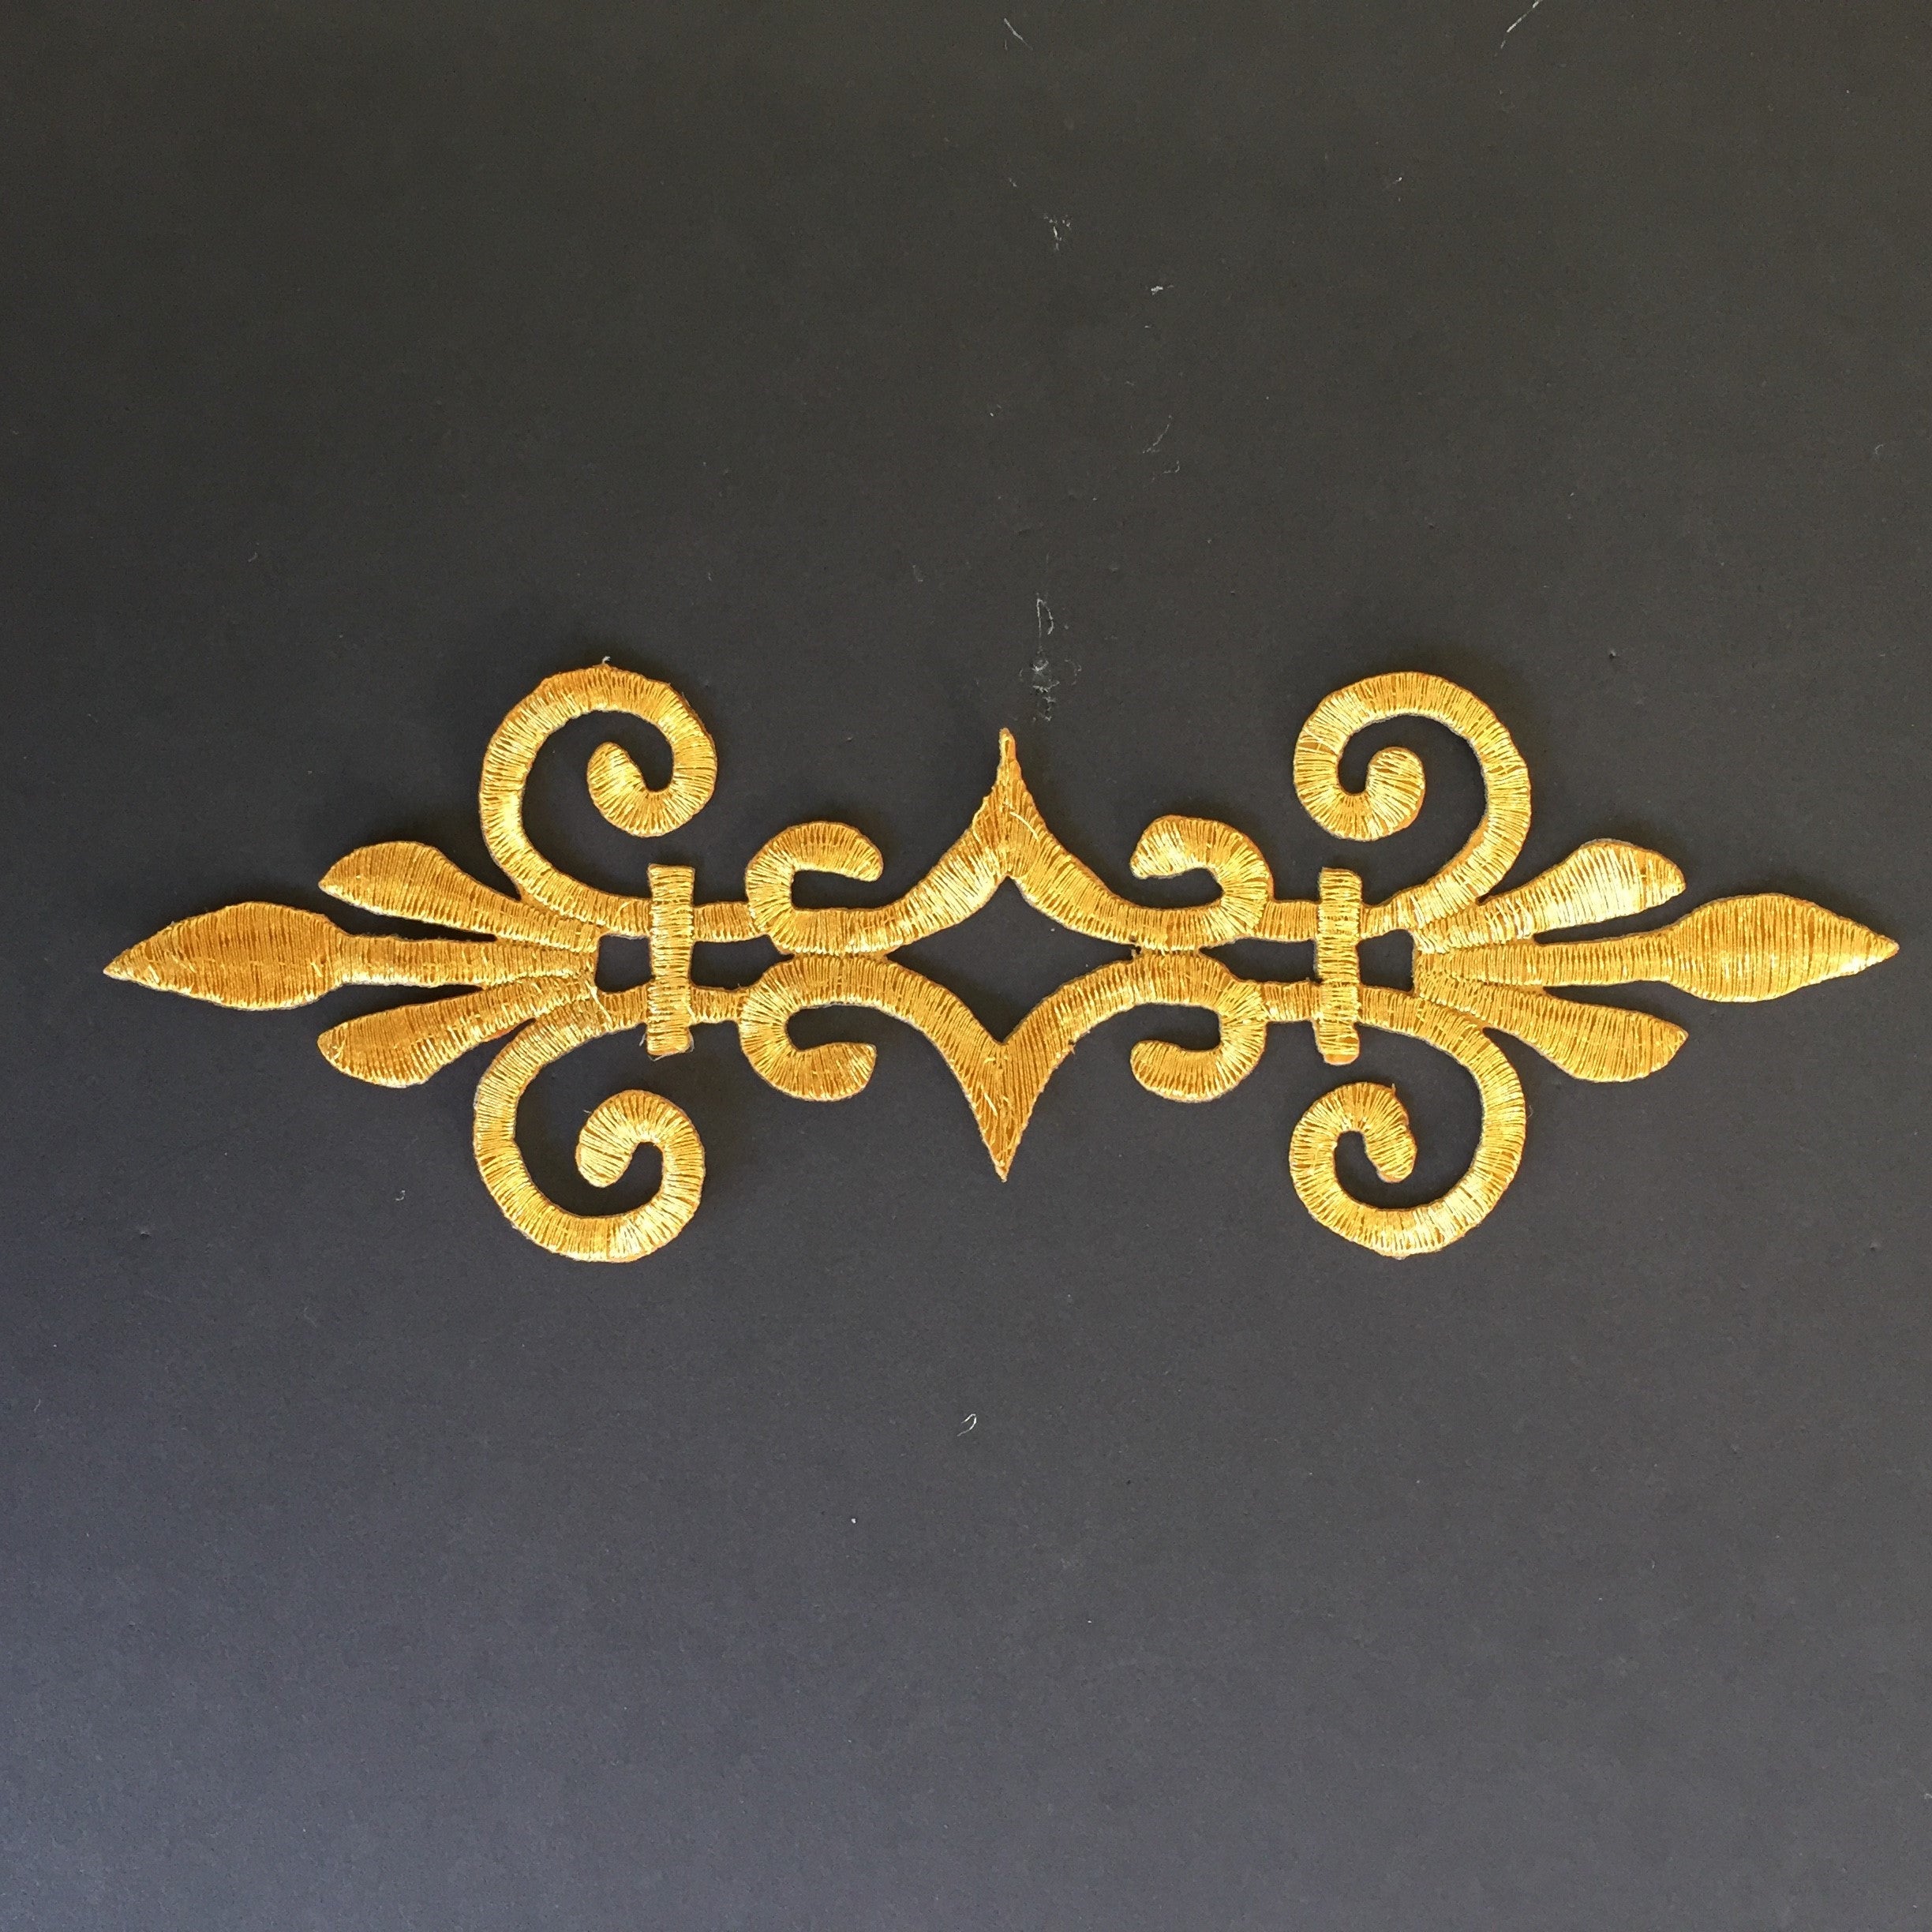 Metallic gold baroque style embroidered cosplay applique on a back background.